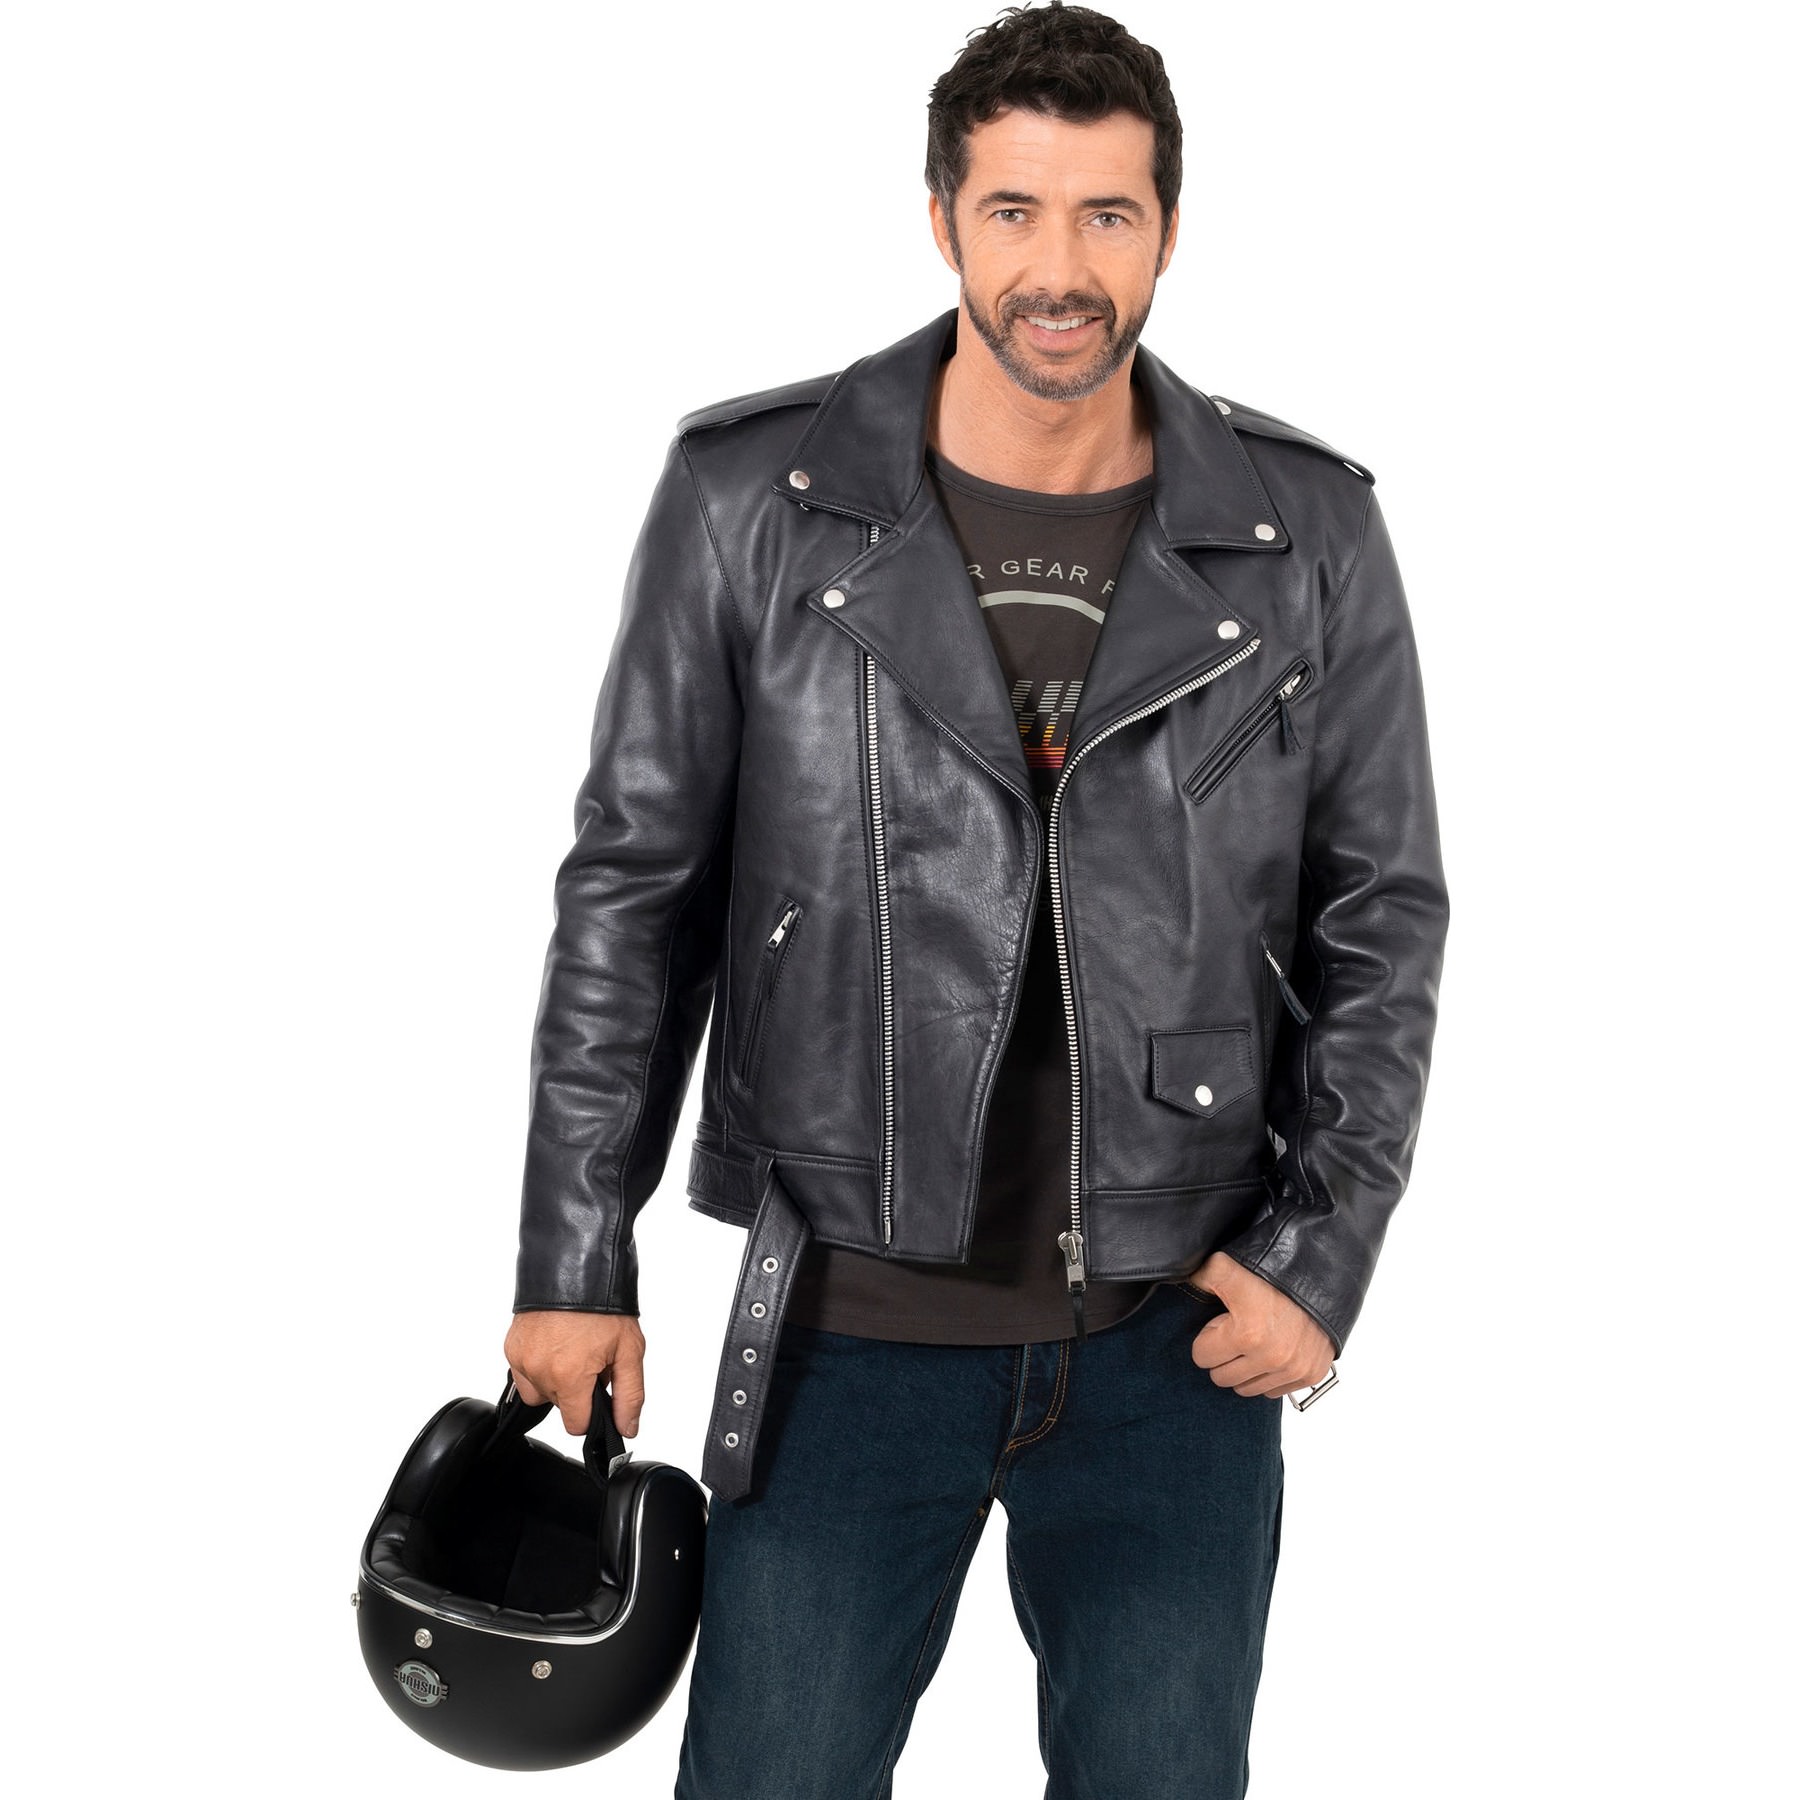 Buy Detlev Louis Pilot leather jacket | Louis motorcycle clothing and technology